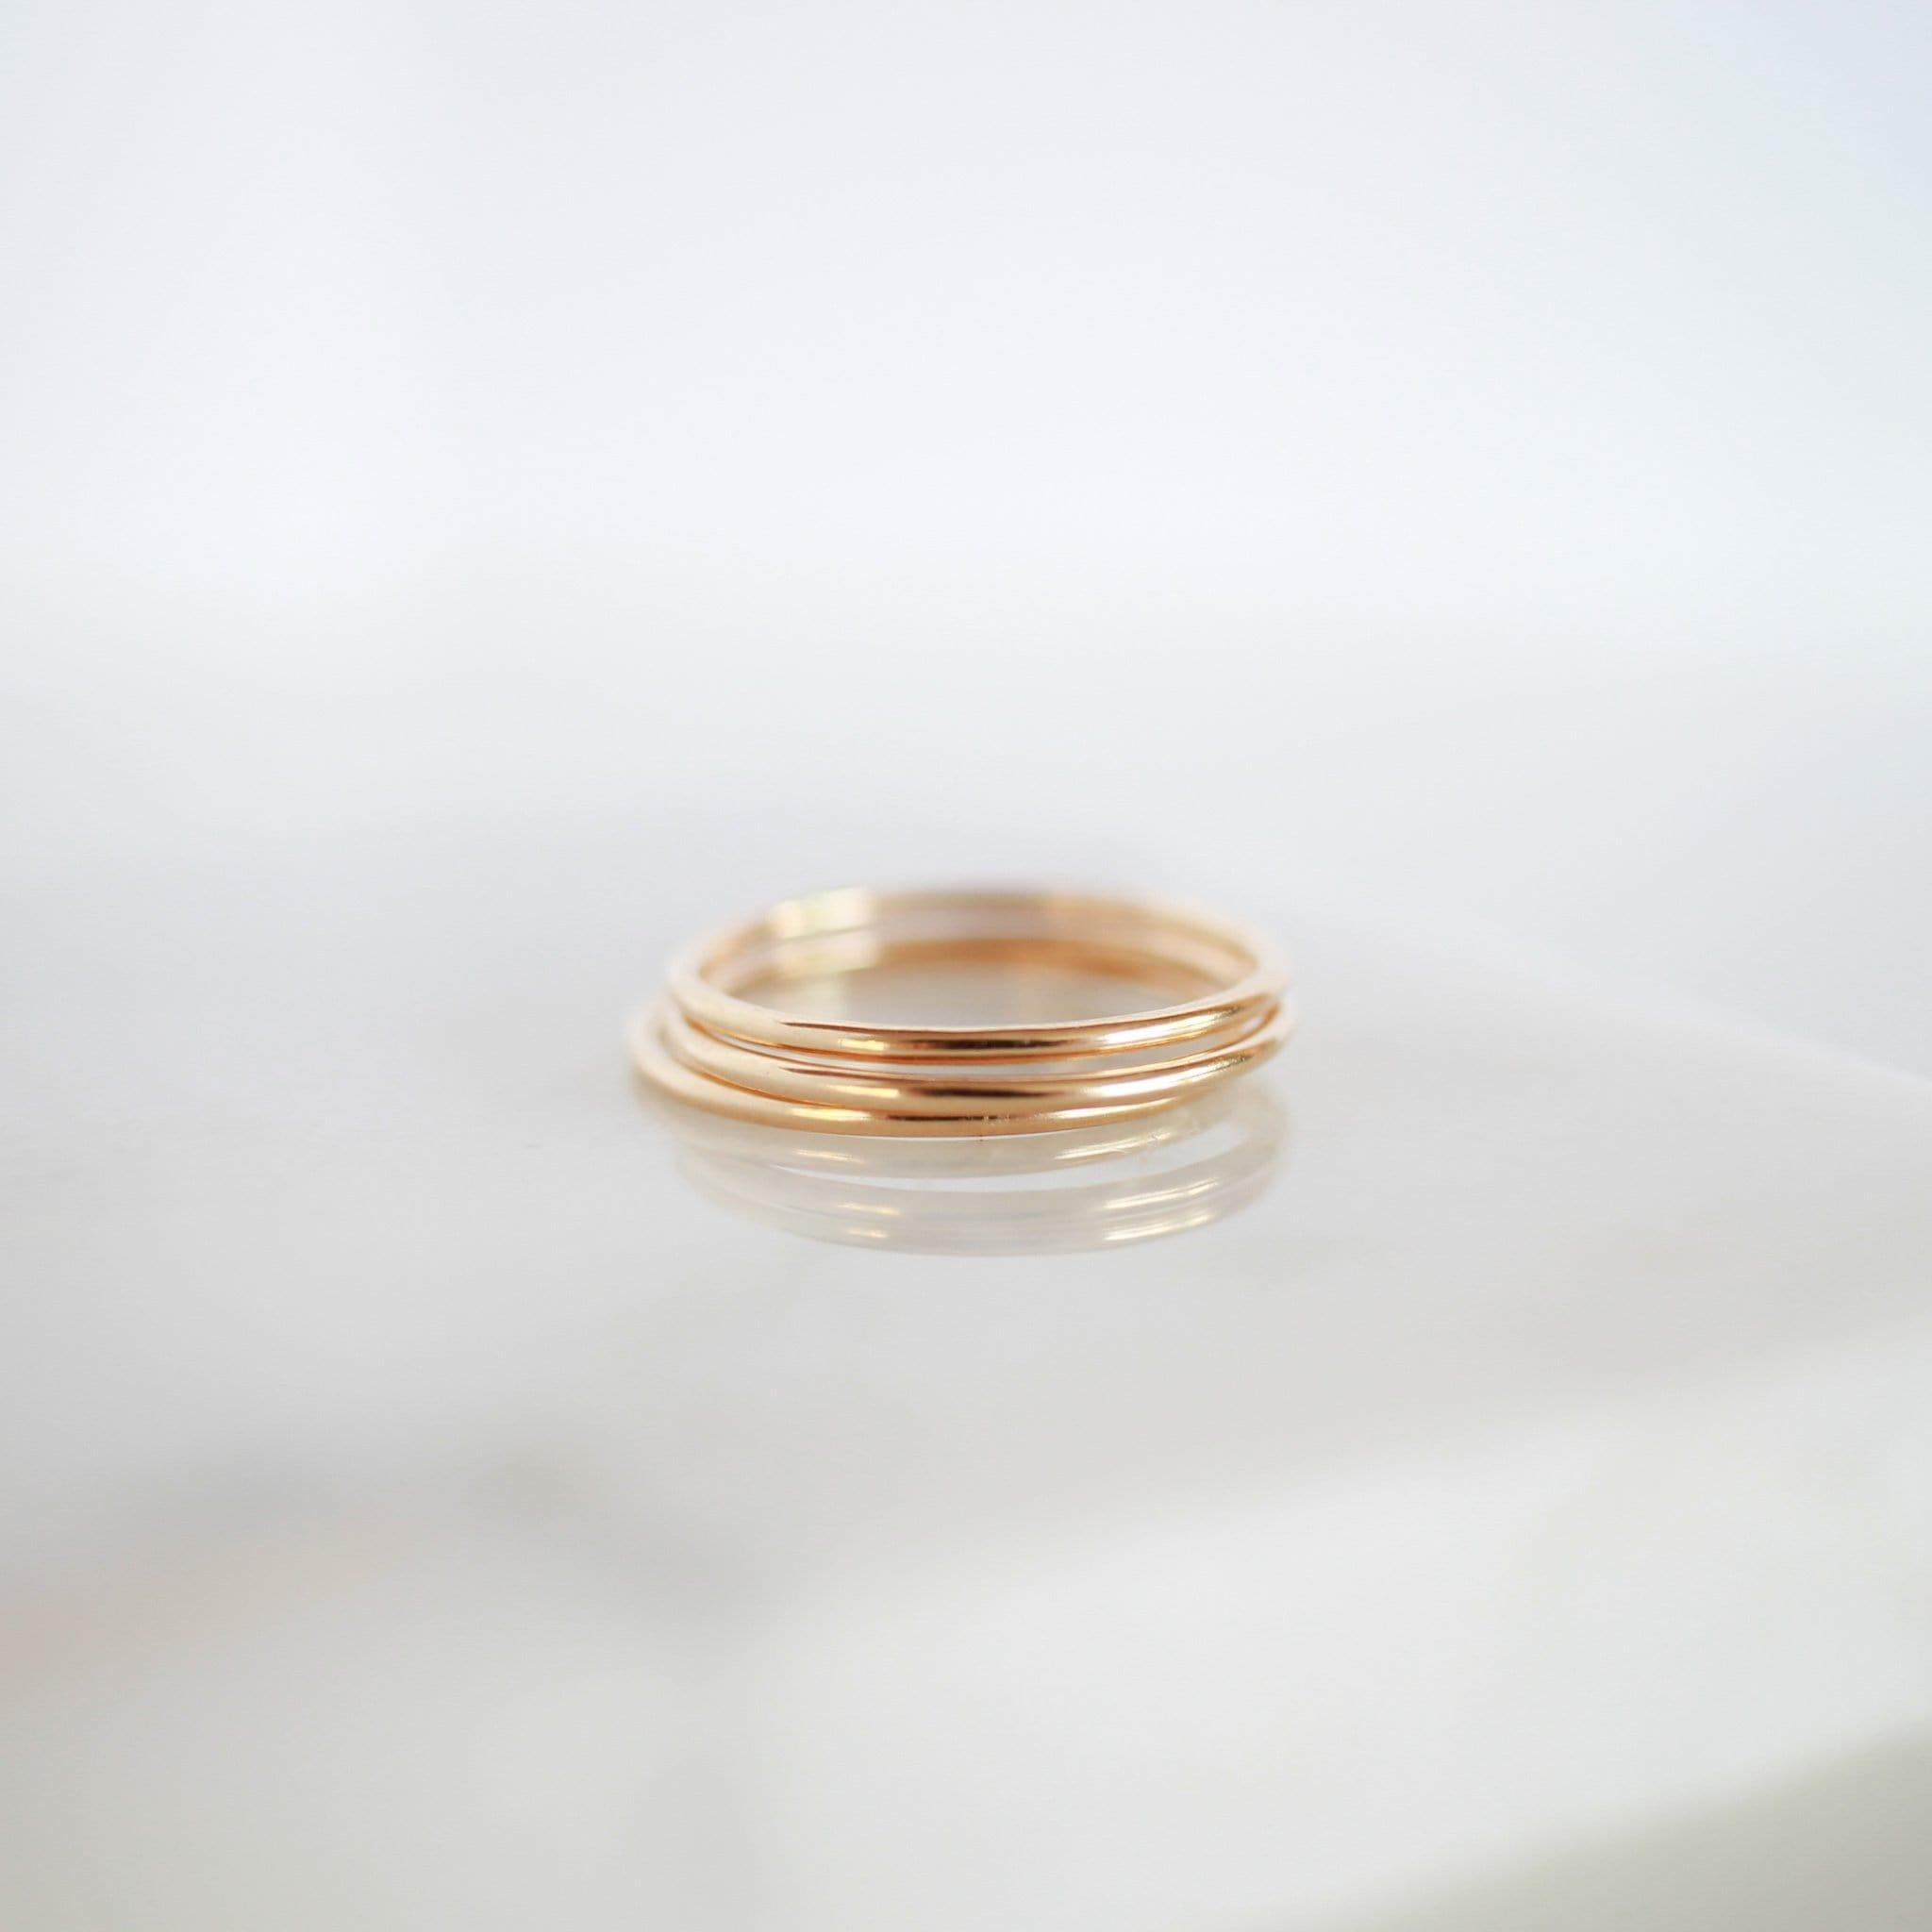 Smooth Skinny Rings - Nolia Jewelry - Meaningful + Sustainably Handcrafted Jewelry